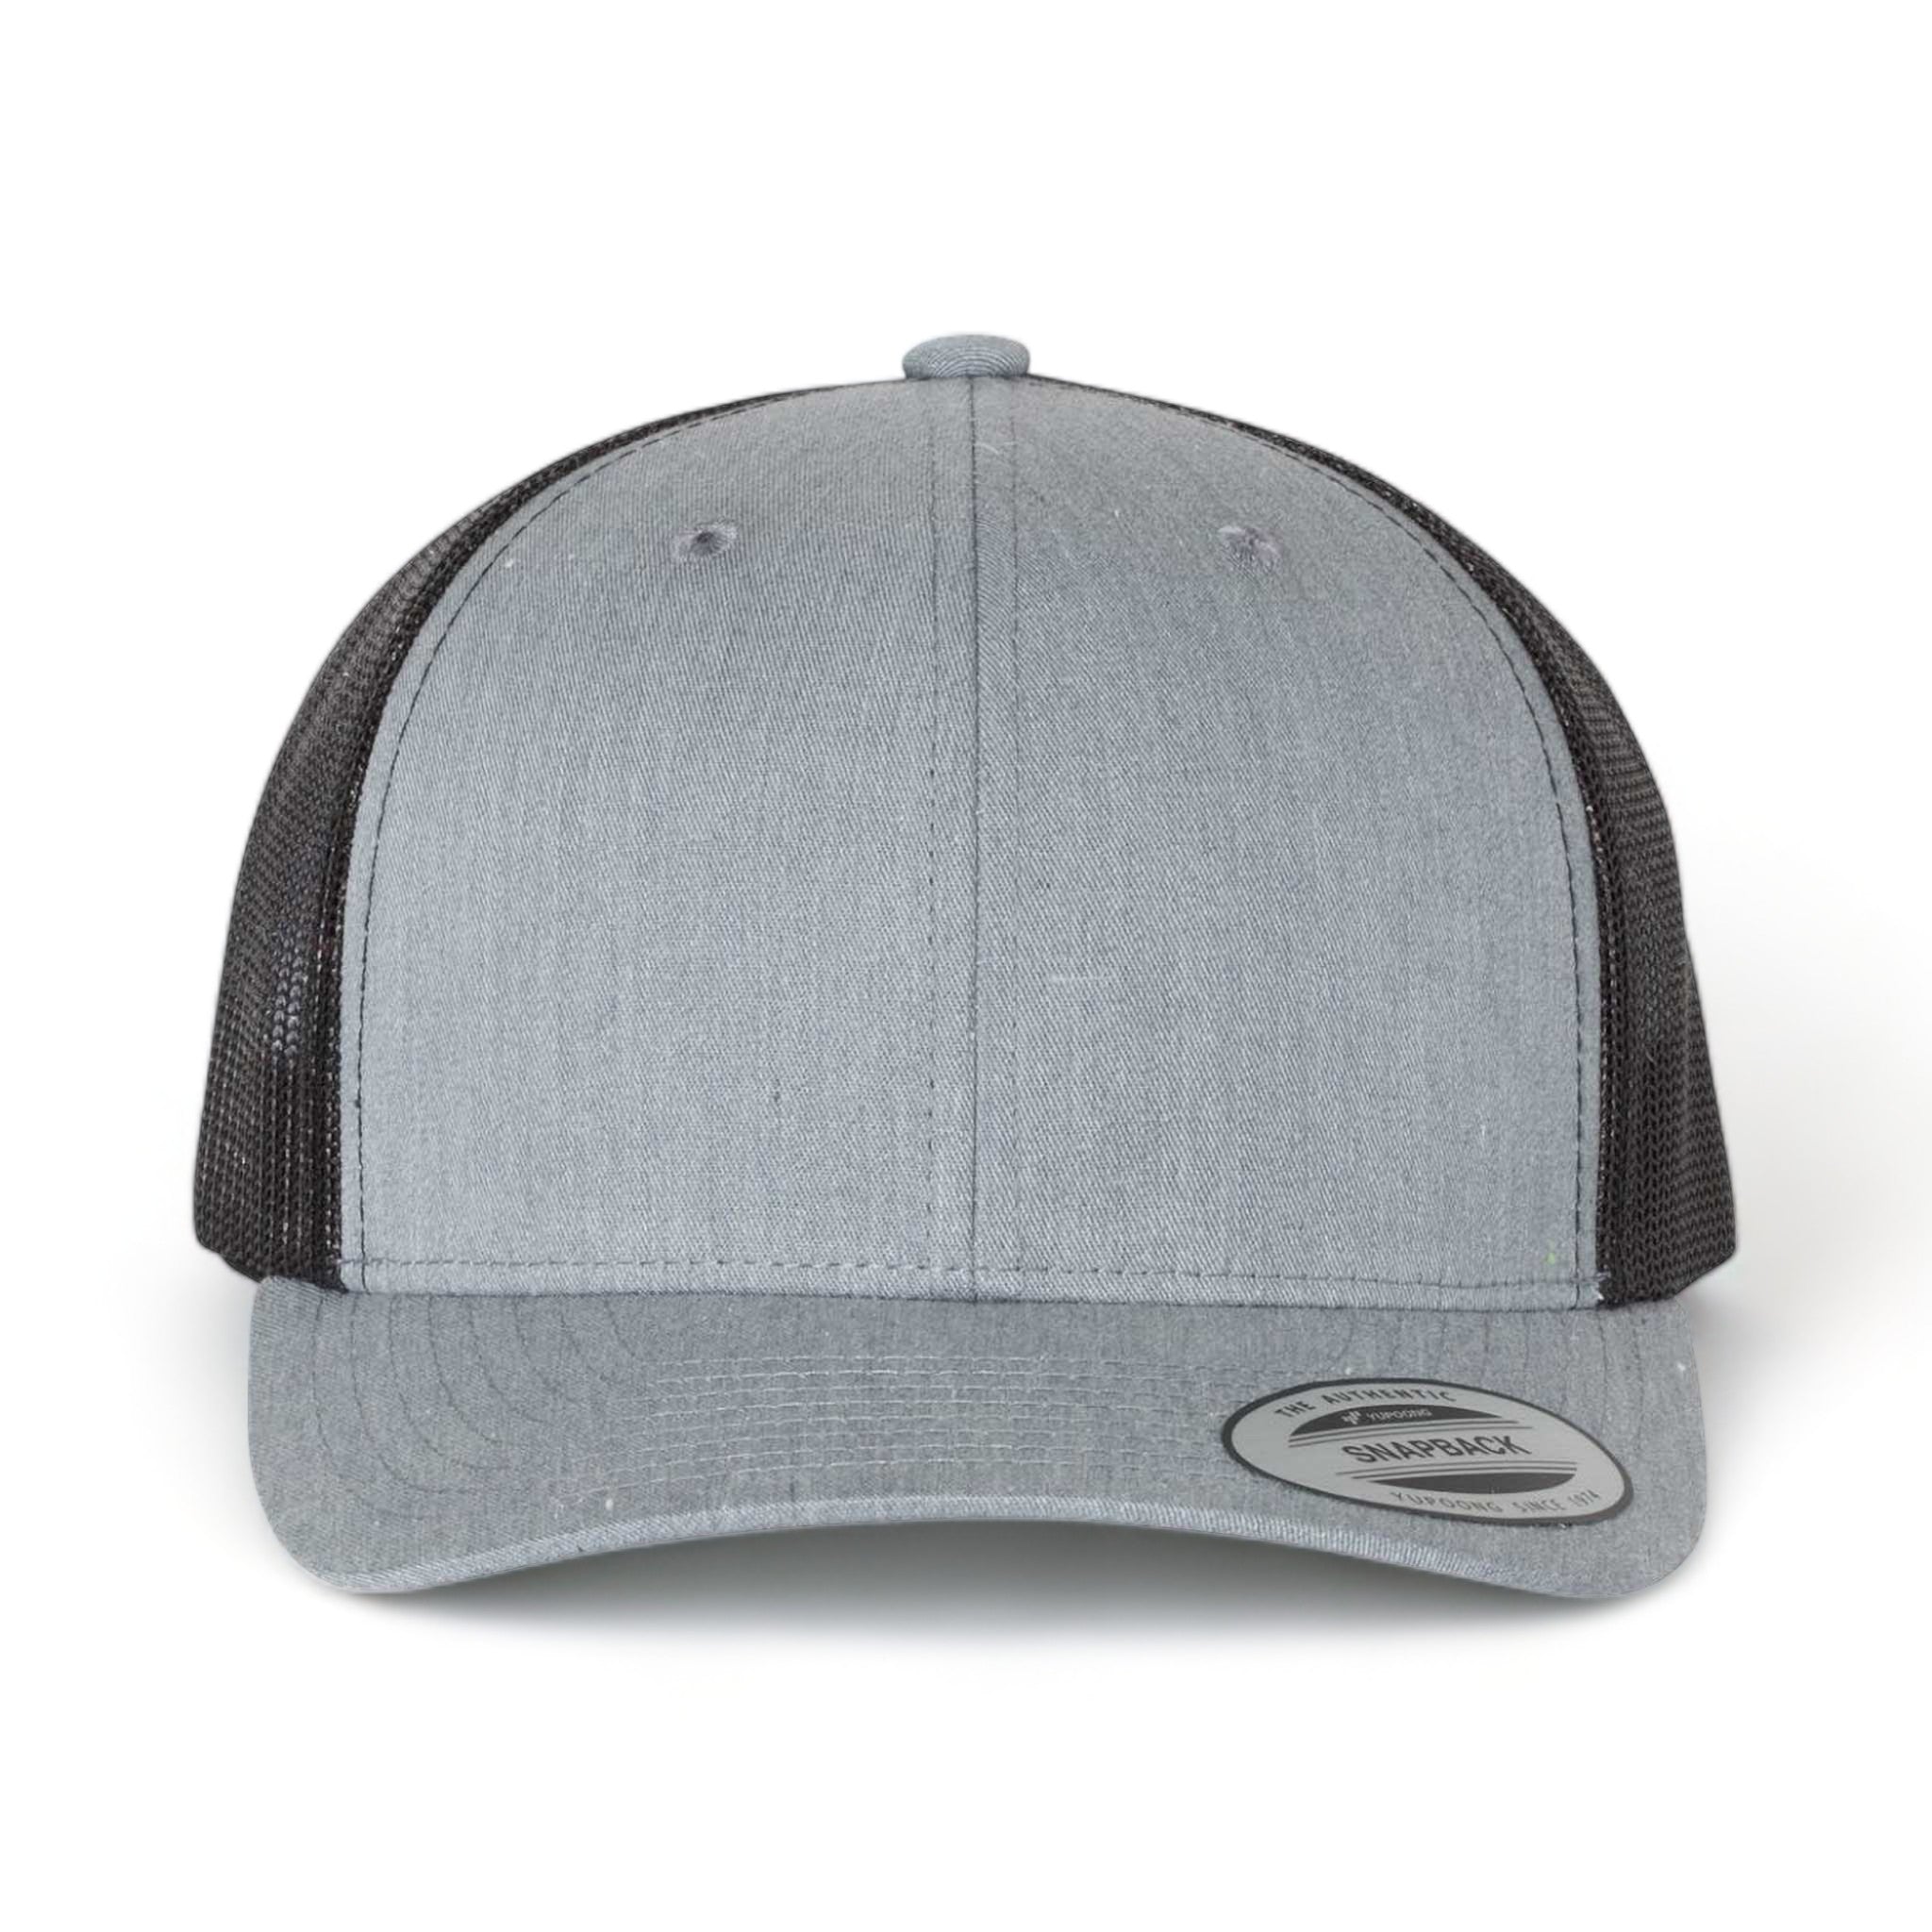 Front view of YP Classics 6606 custom hat in heather grey and black